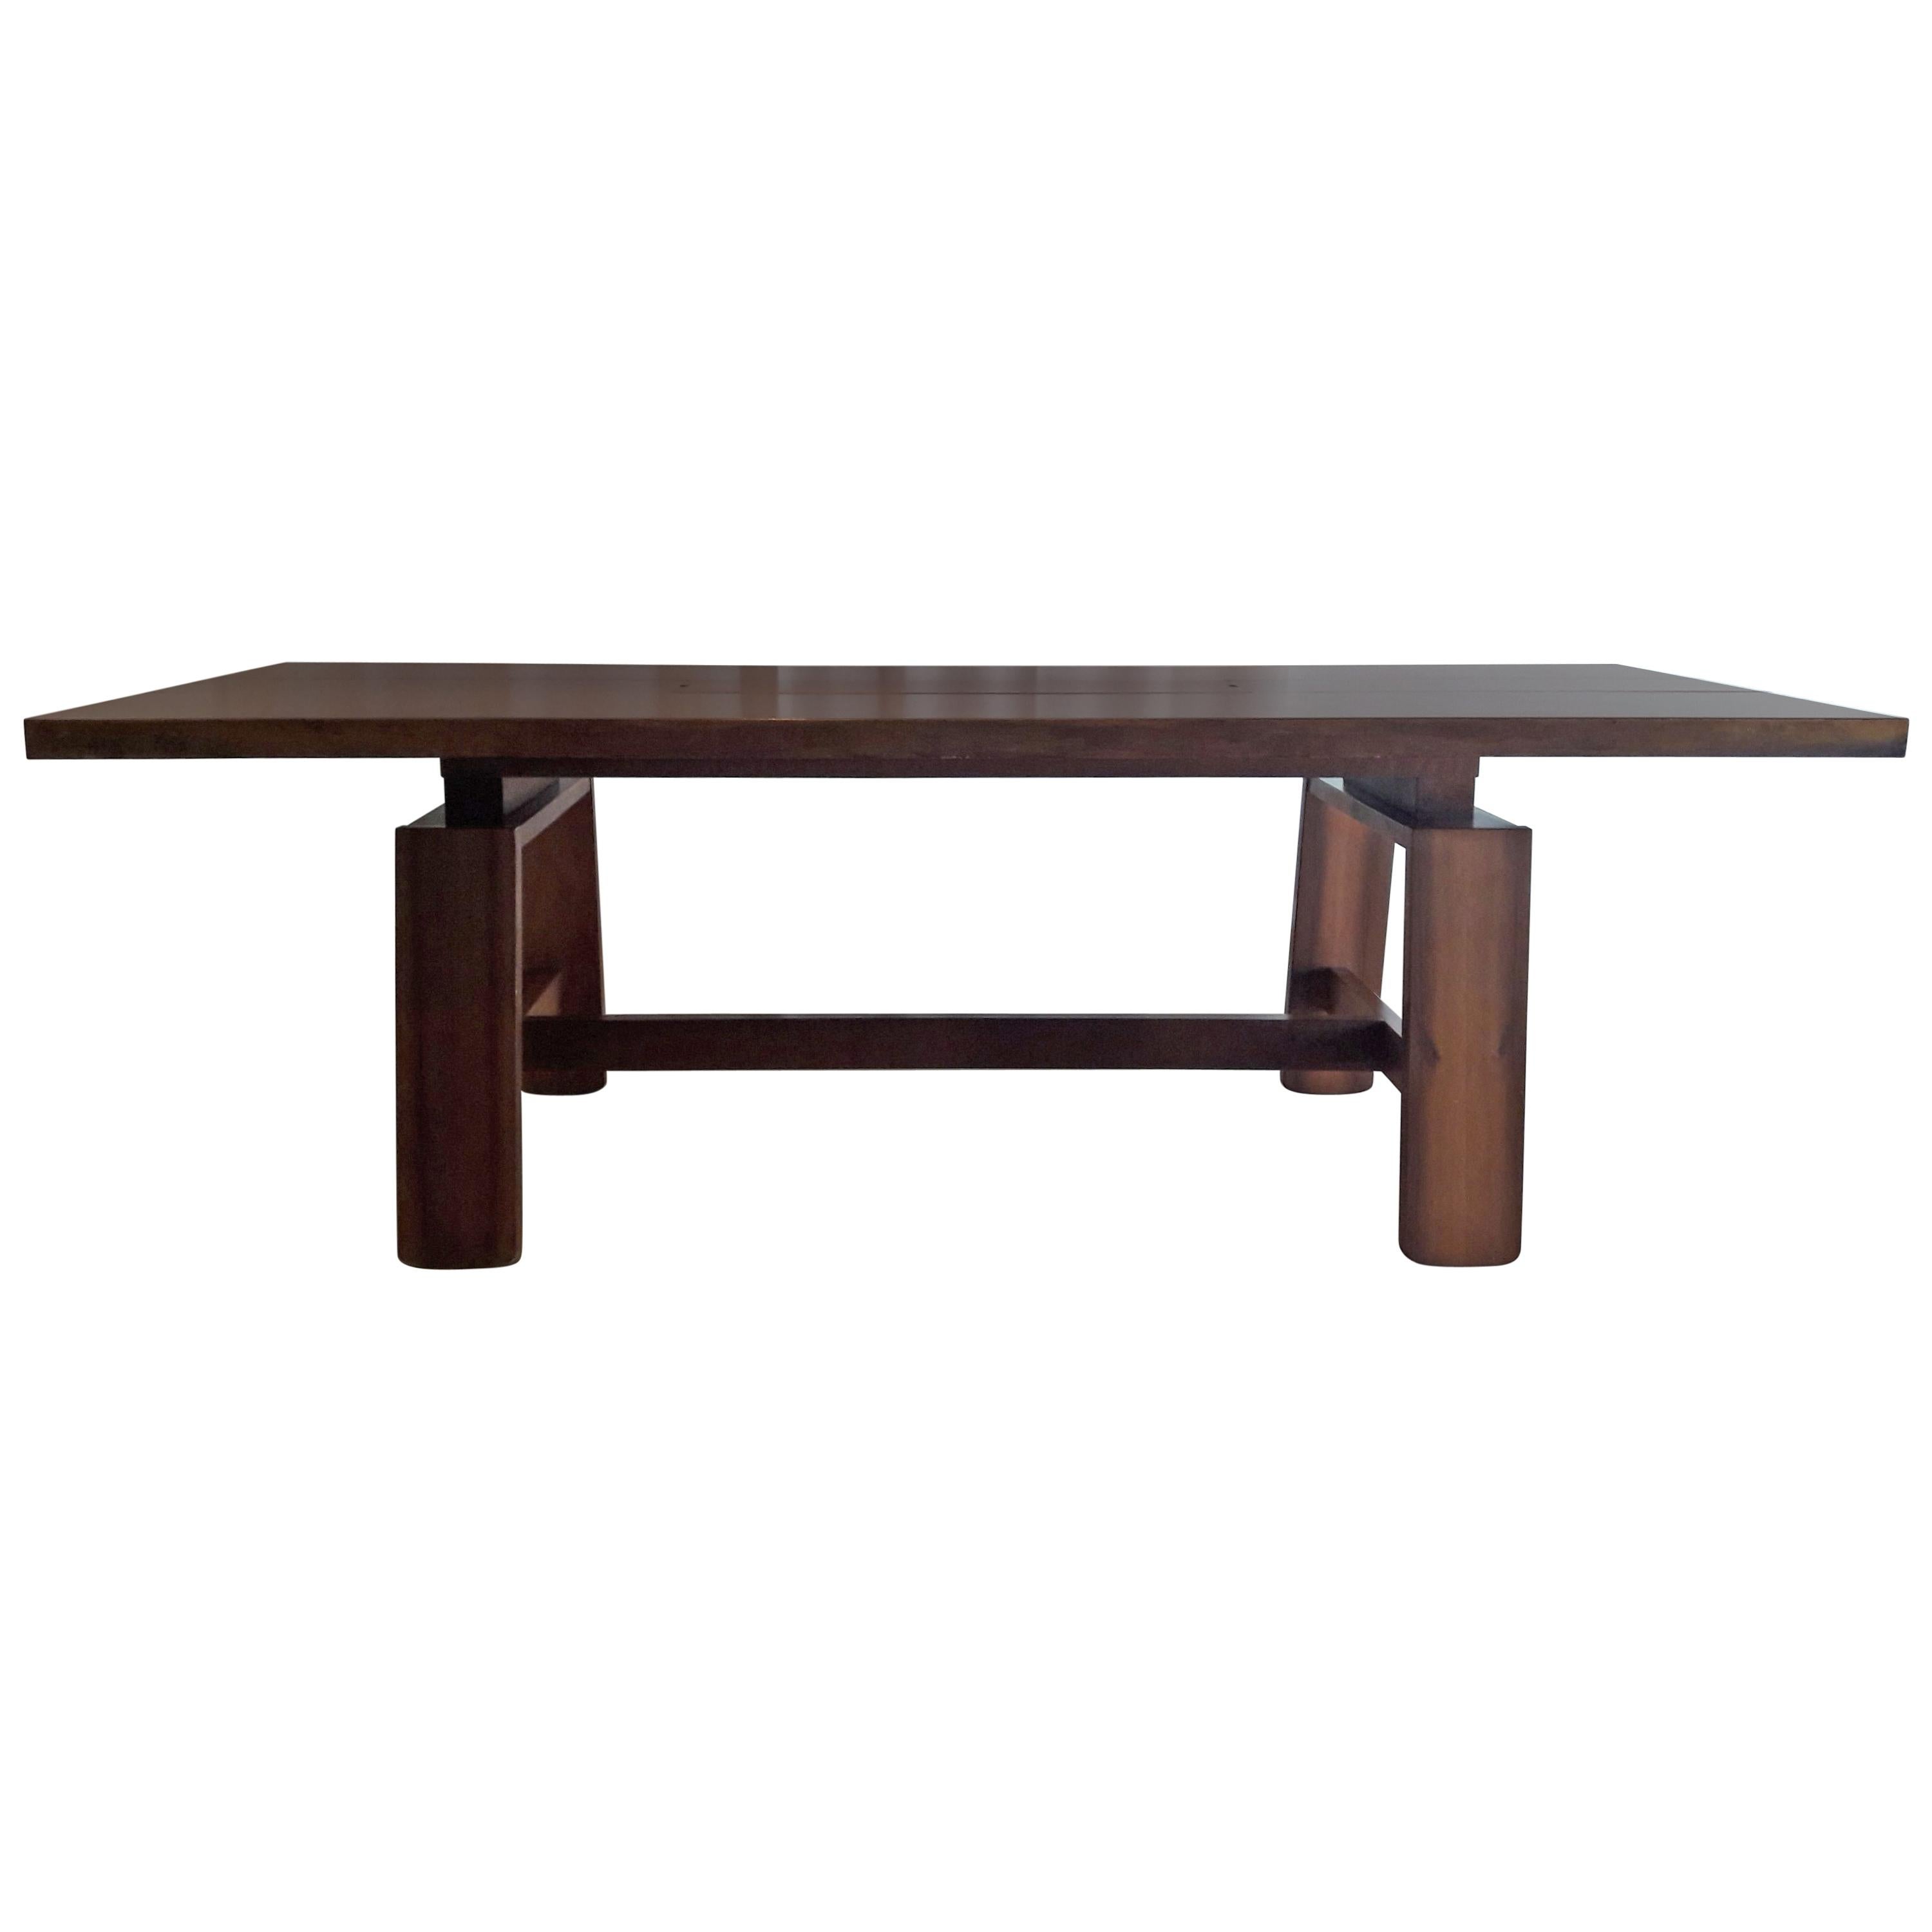 Coppola Mid-Century Modern Large Walnut Dining Table for Bernini, Italy For Sale